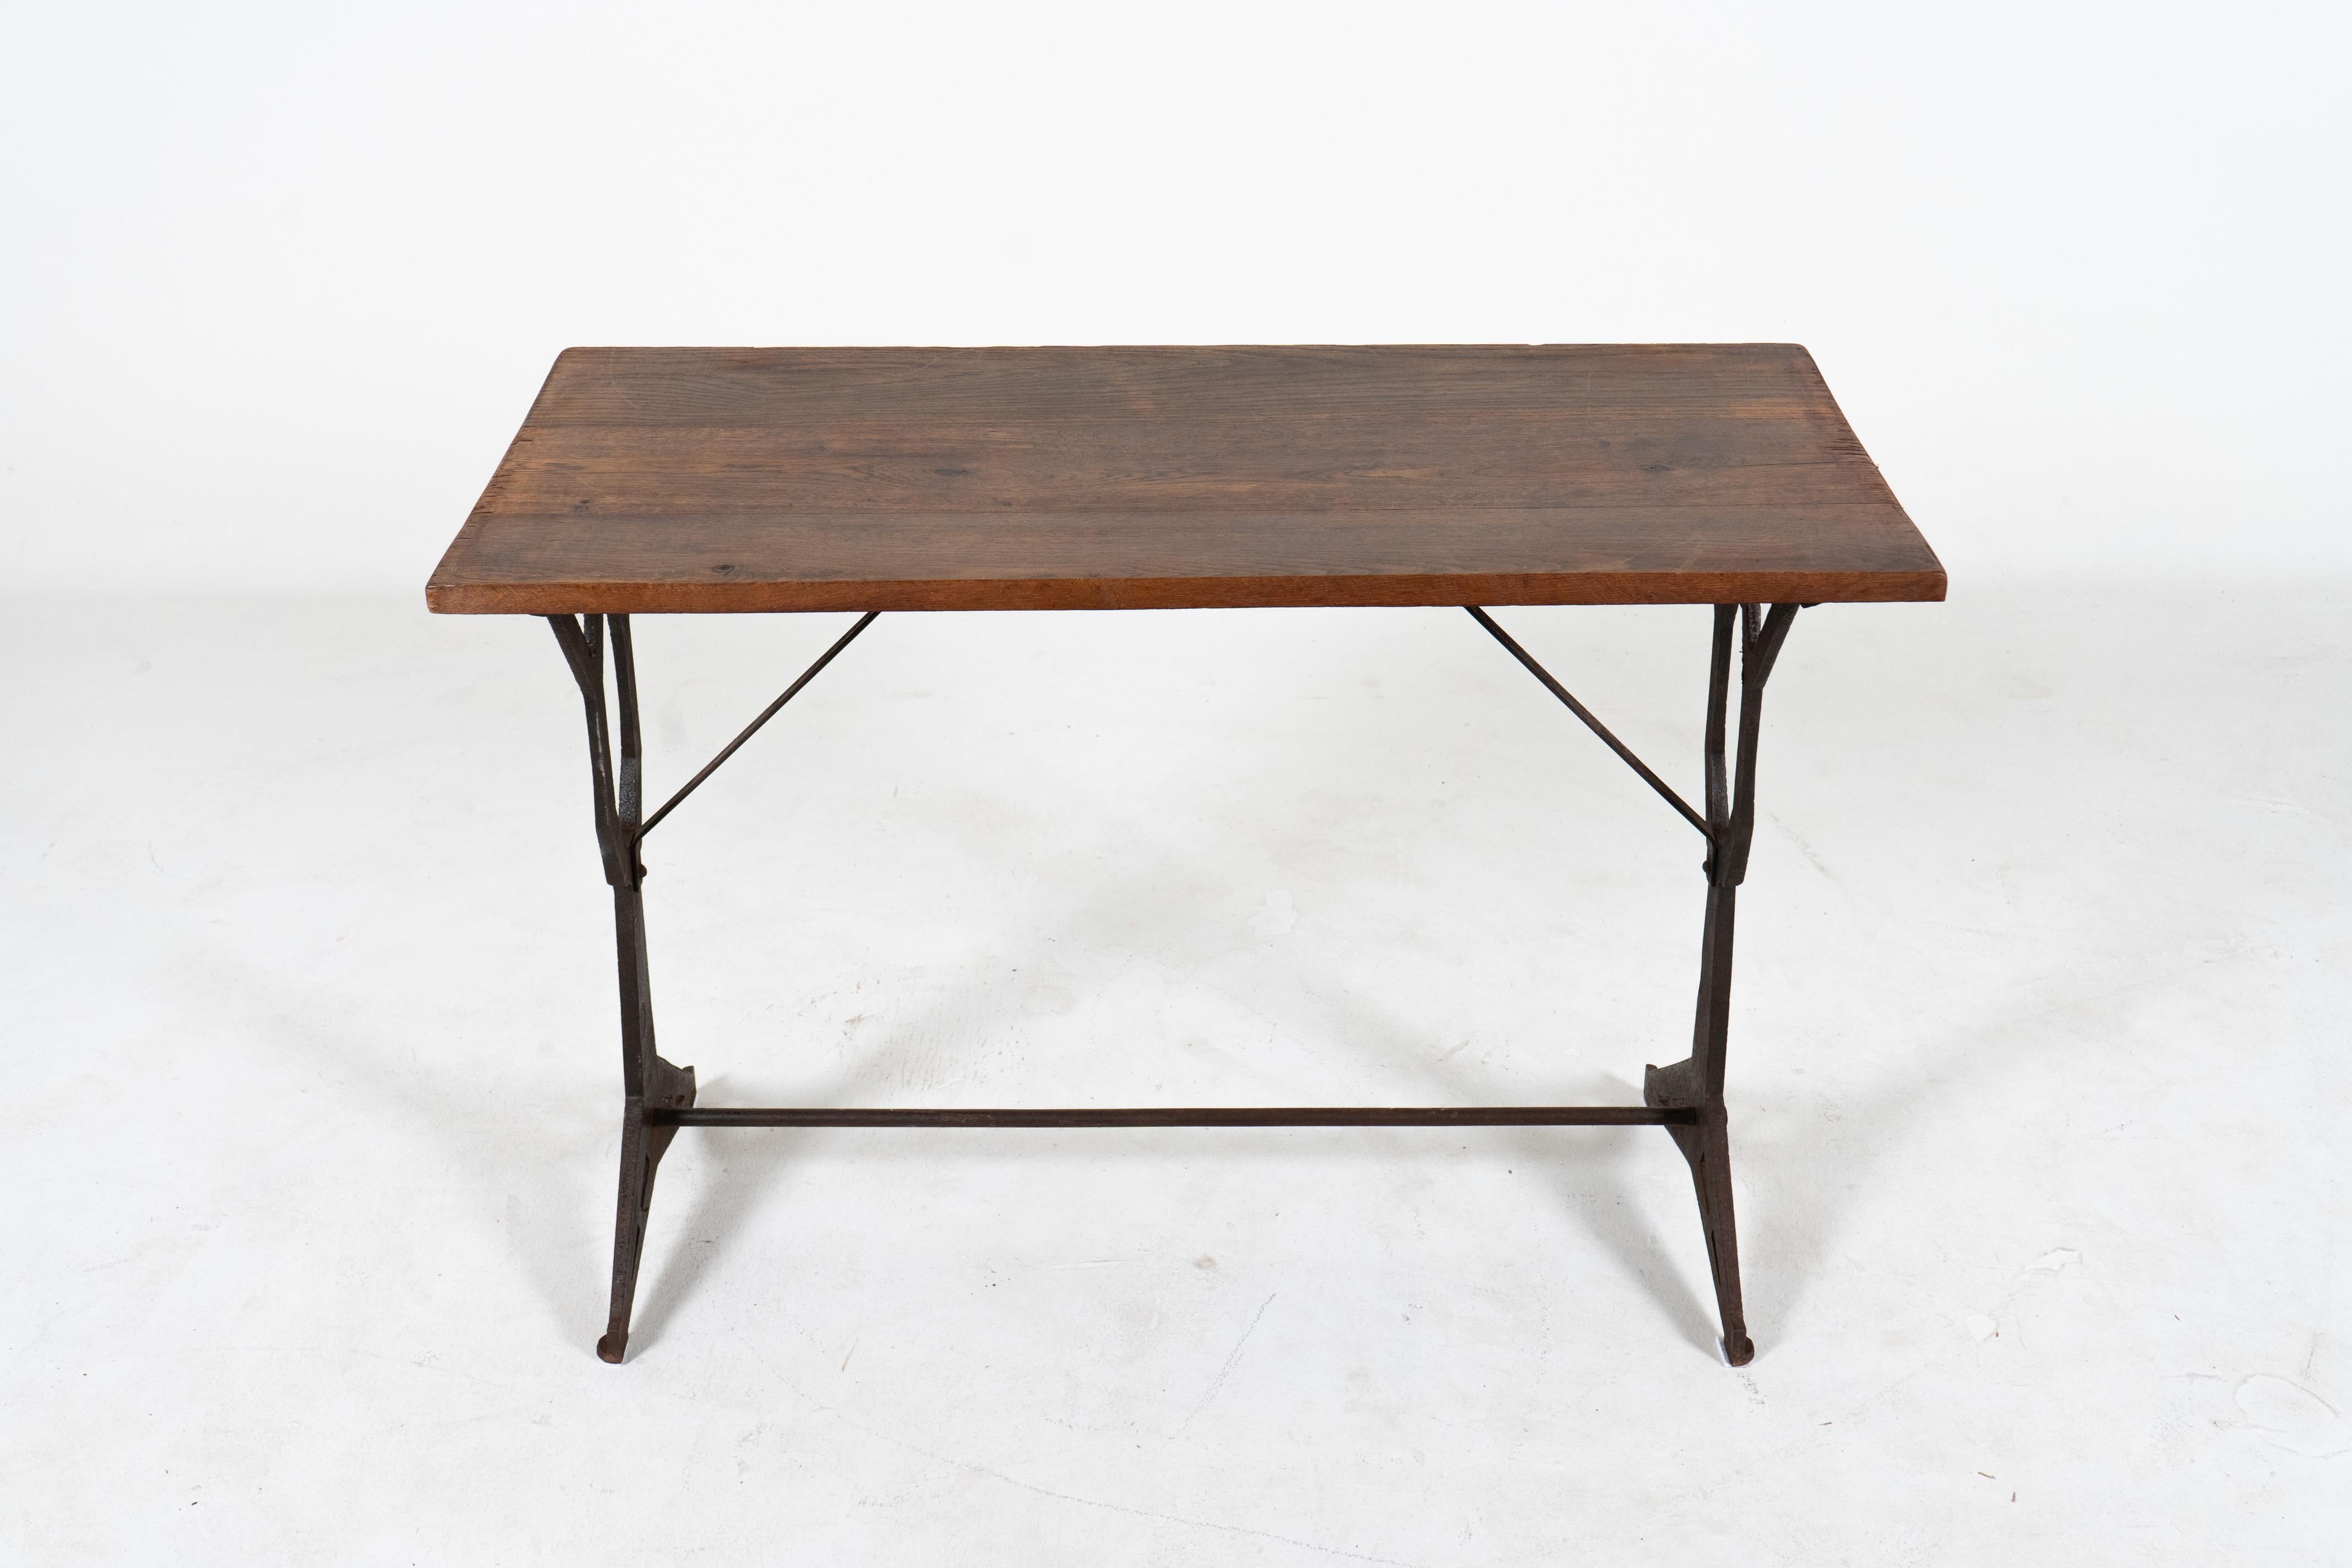 A charming vintage French bistro table from Paris with a thick rectangular slated oak wood top. This table has detailed cast iron legs with an x-shaped brace between the legs for support. The design of the legs is cubist -quite angular and unusual.